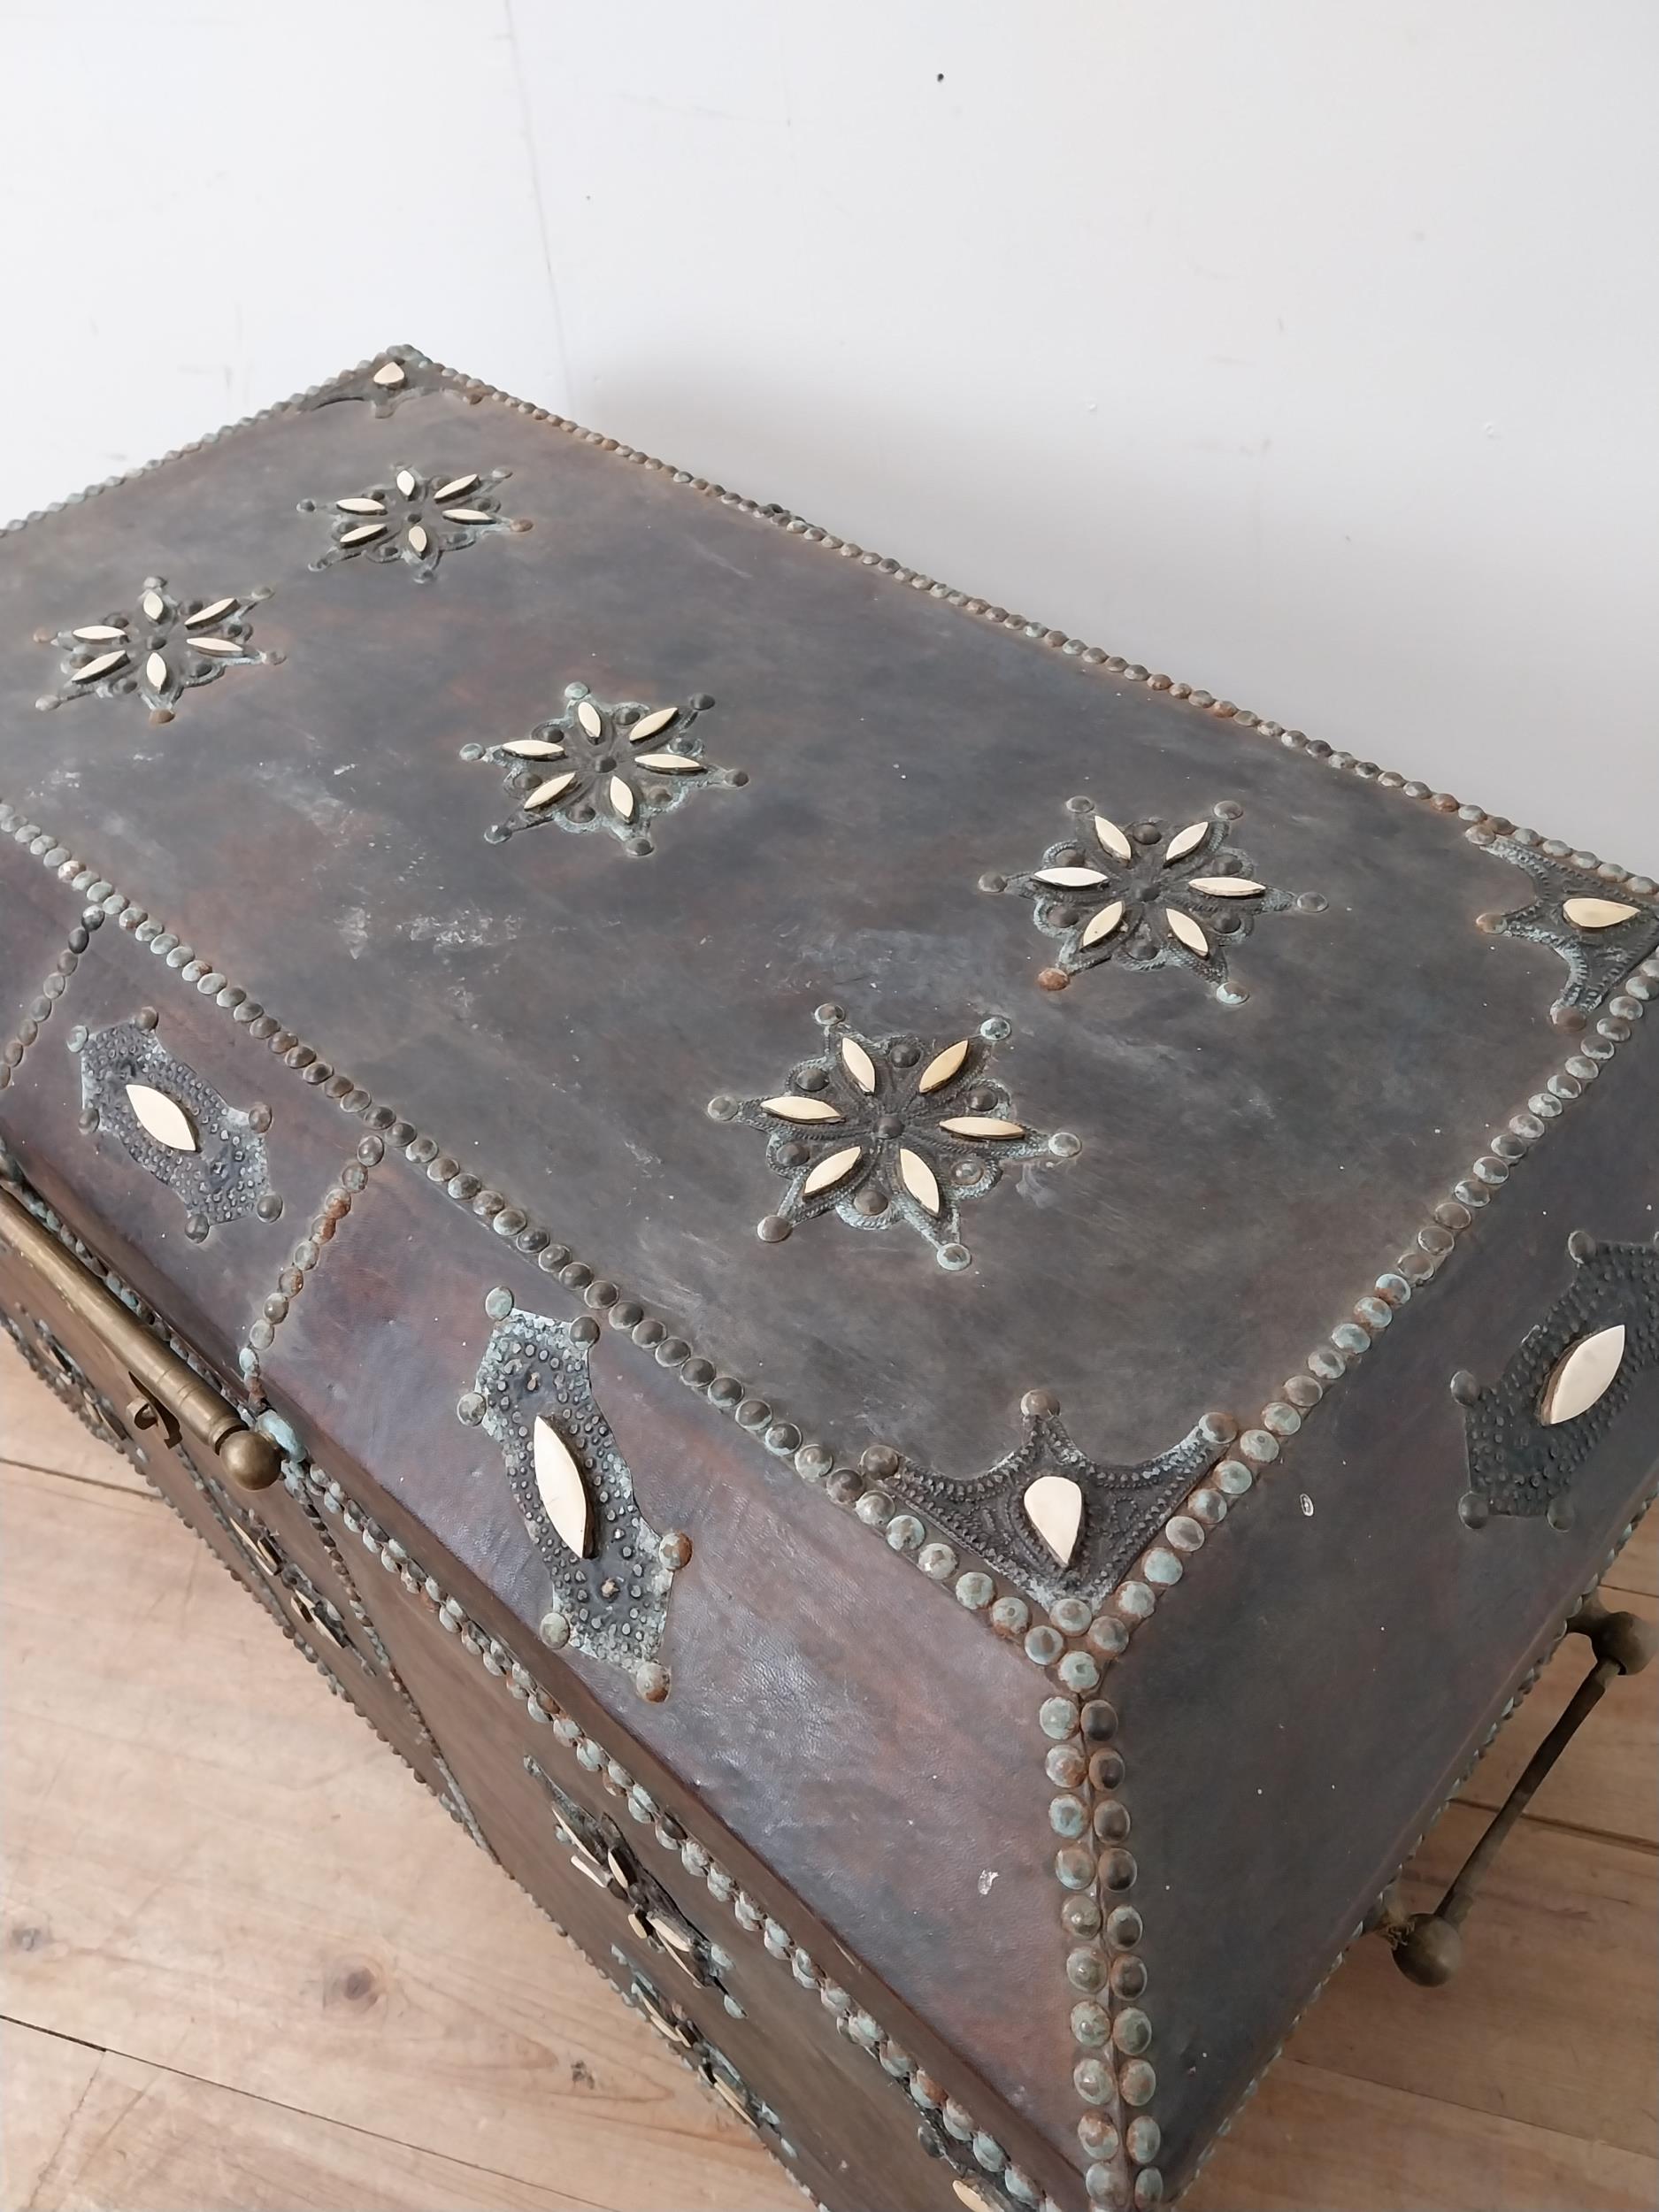 Unusual 20th C. leather bound trunk with brass studded detail {72cm H x 100cm W x 60cm D} - Image 4 of 5